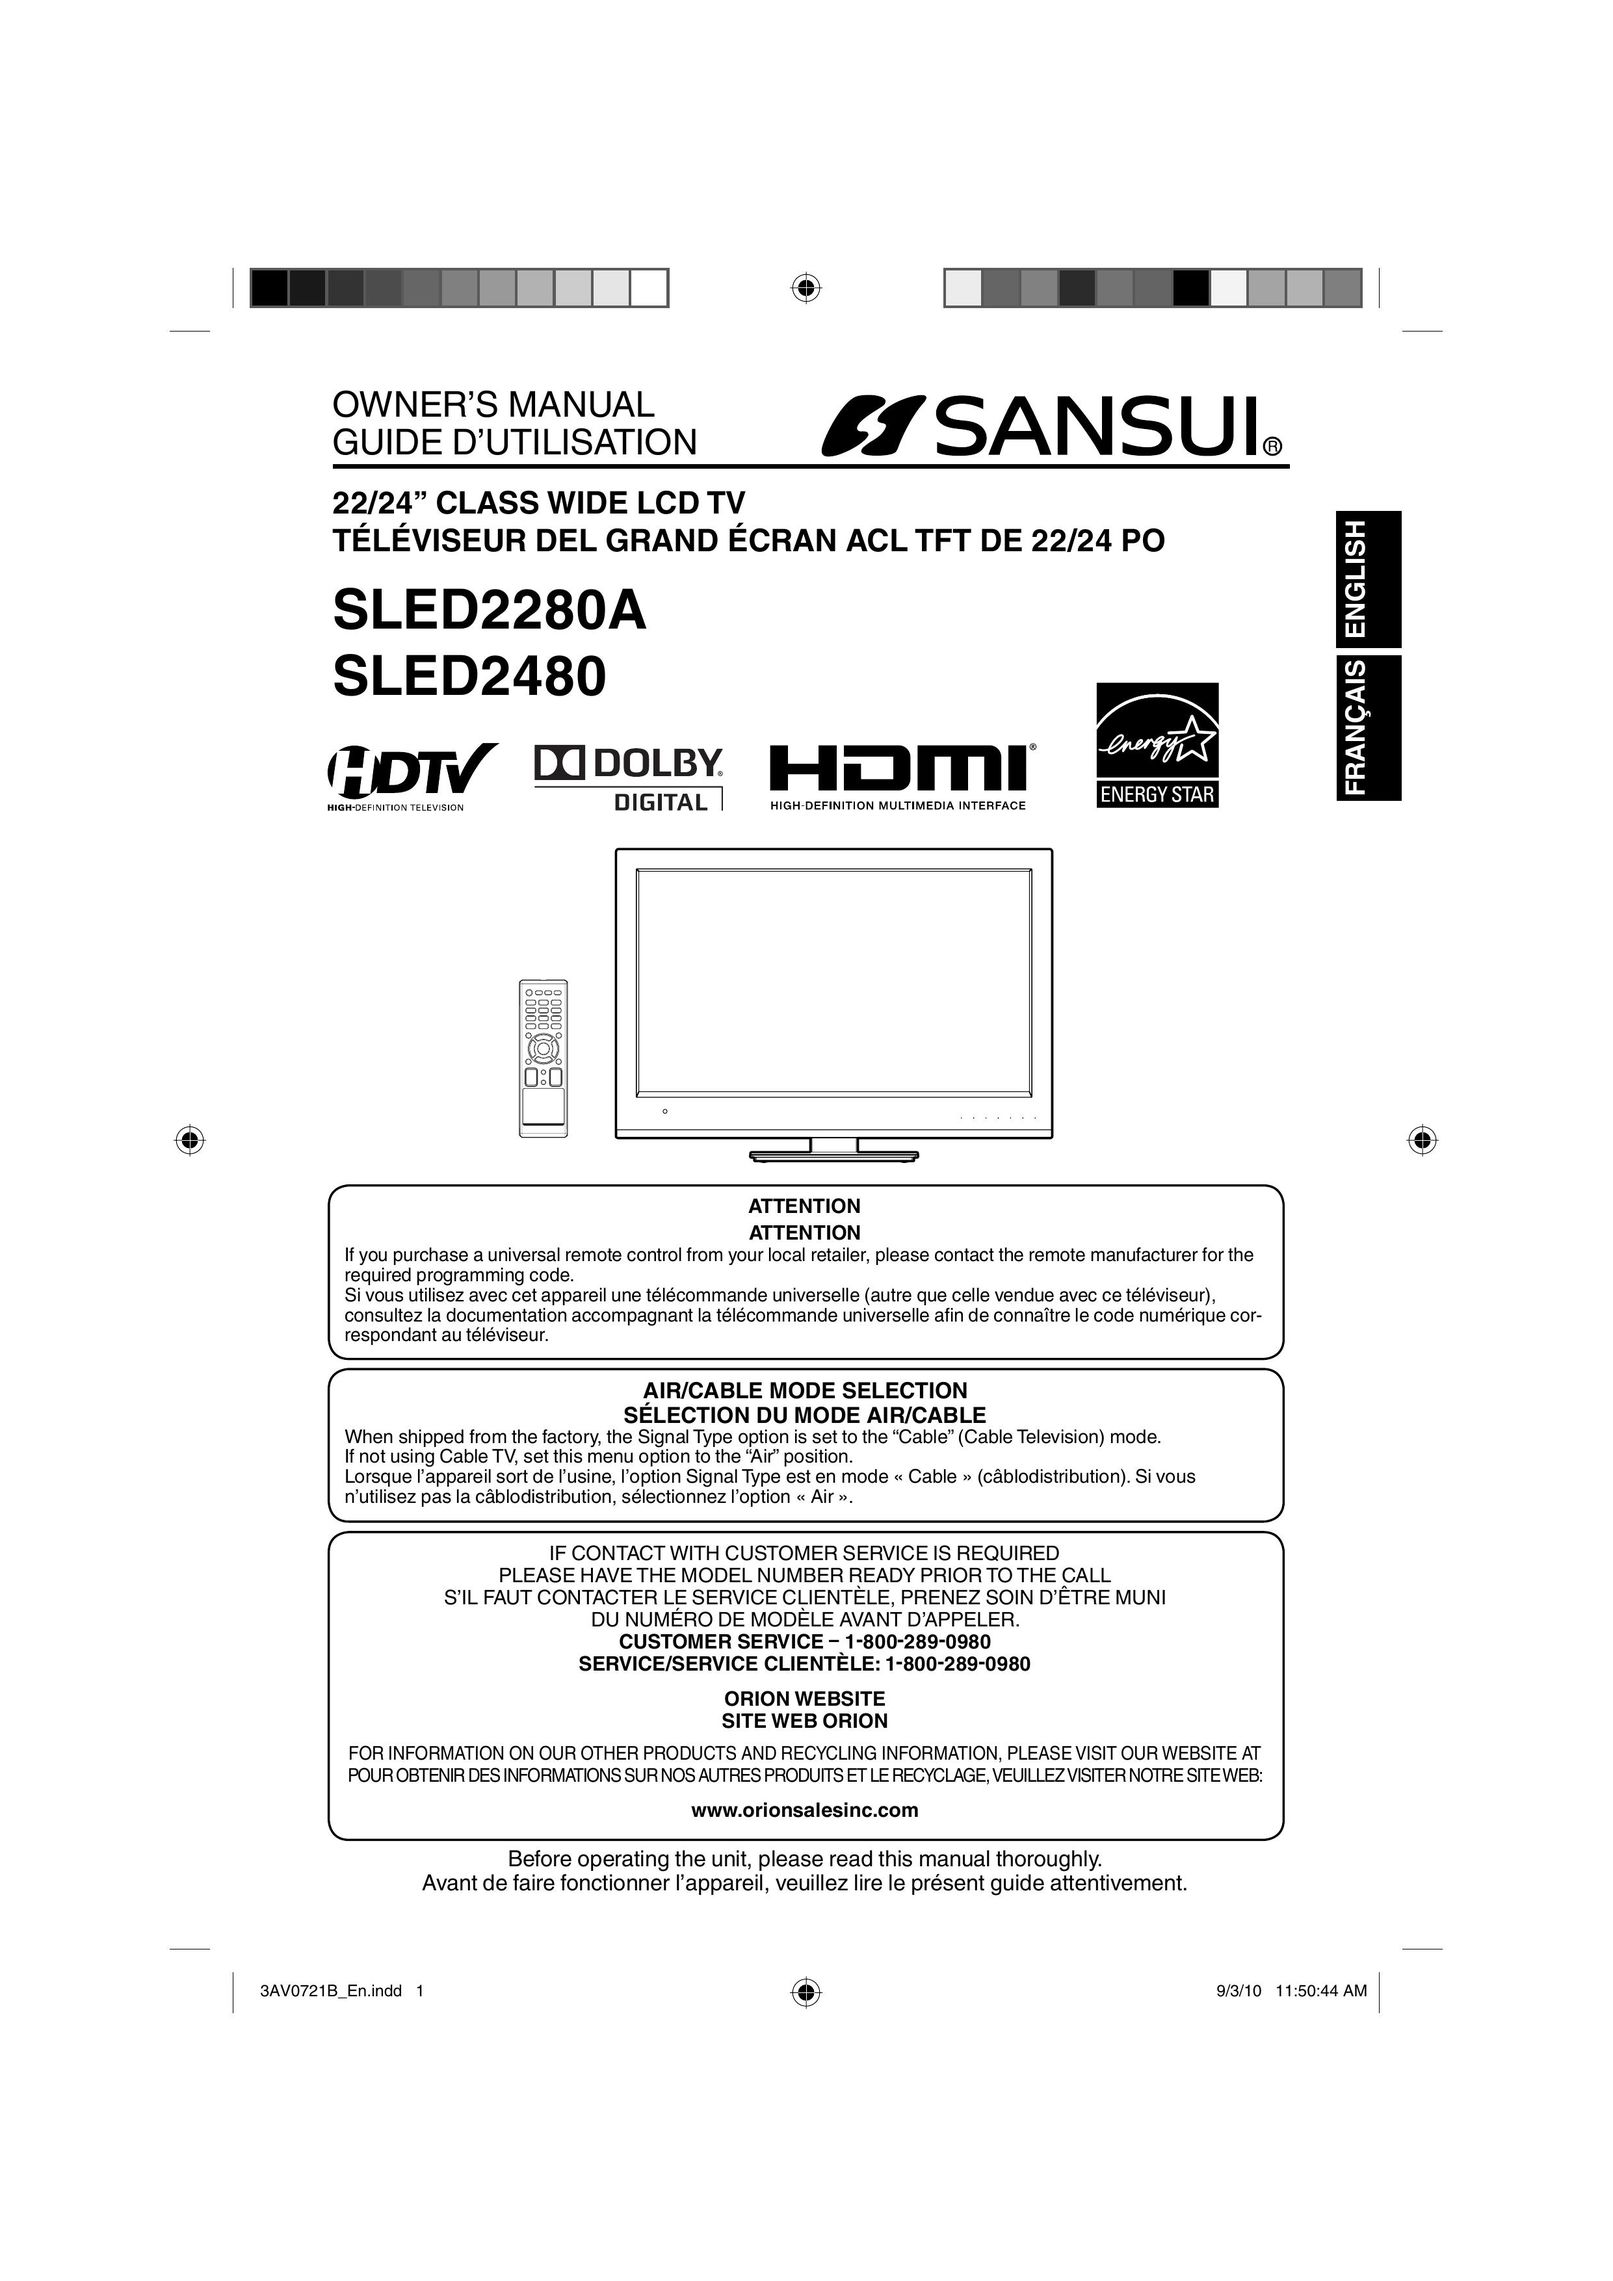 Sansui SLED2280A Flat Panel Television User Manual